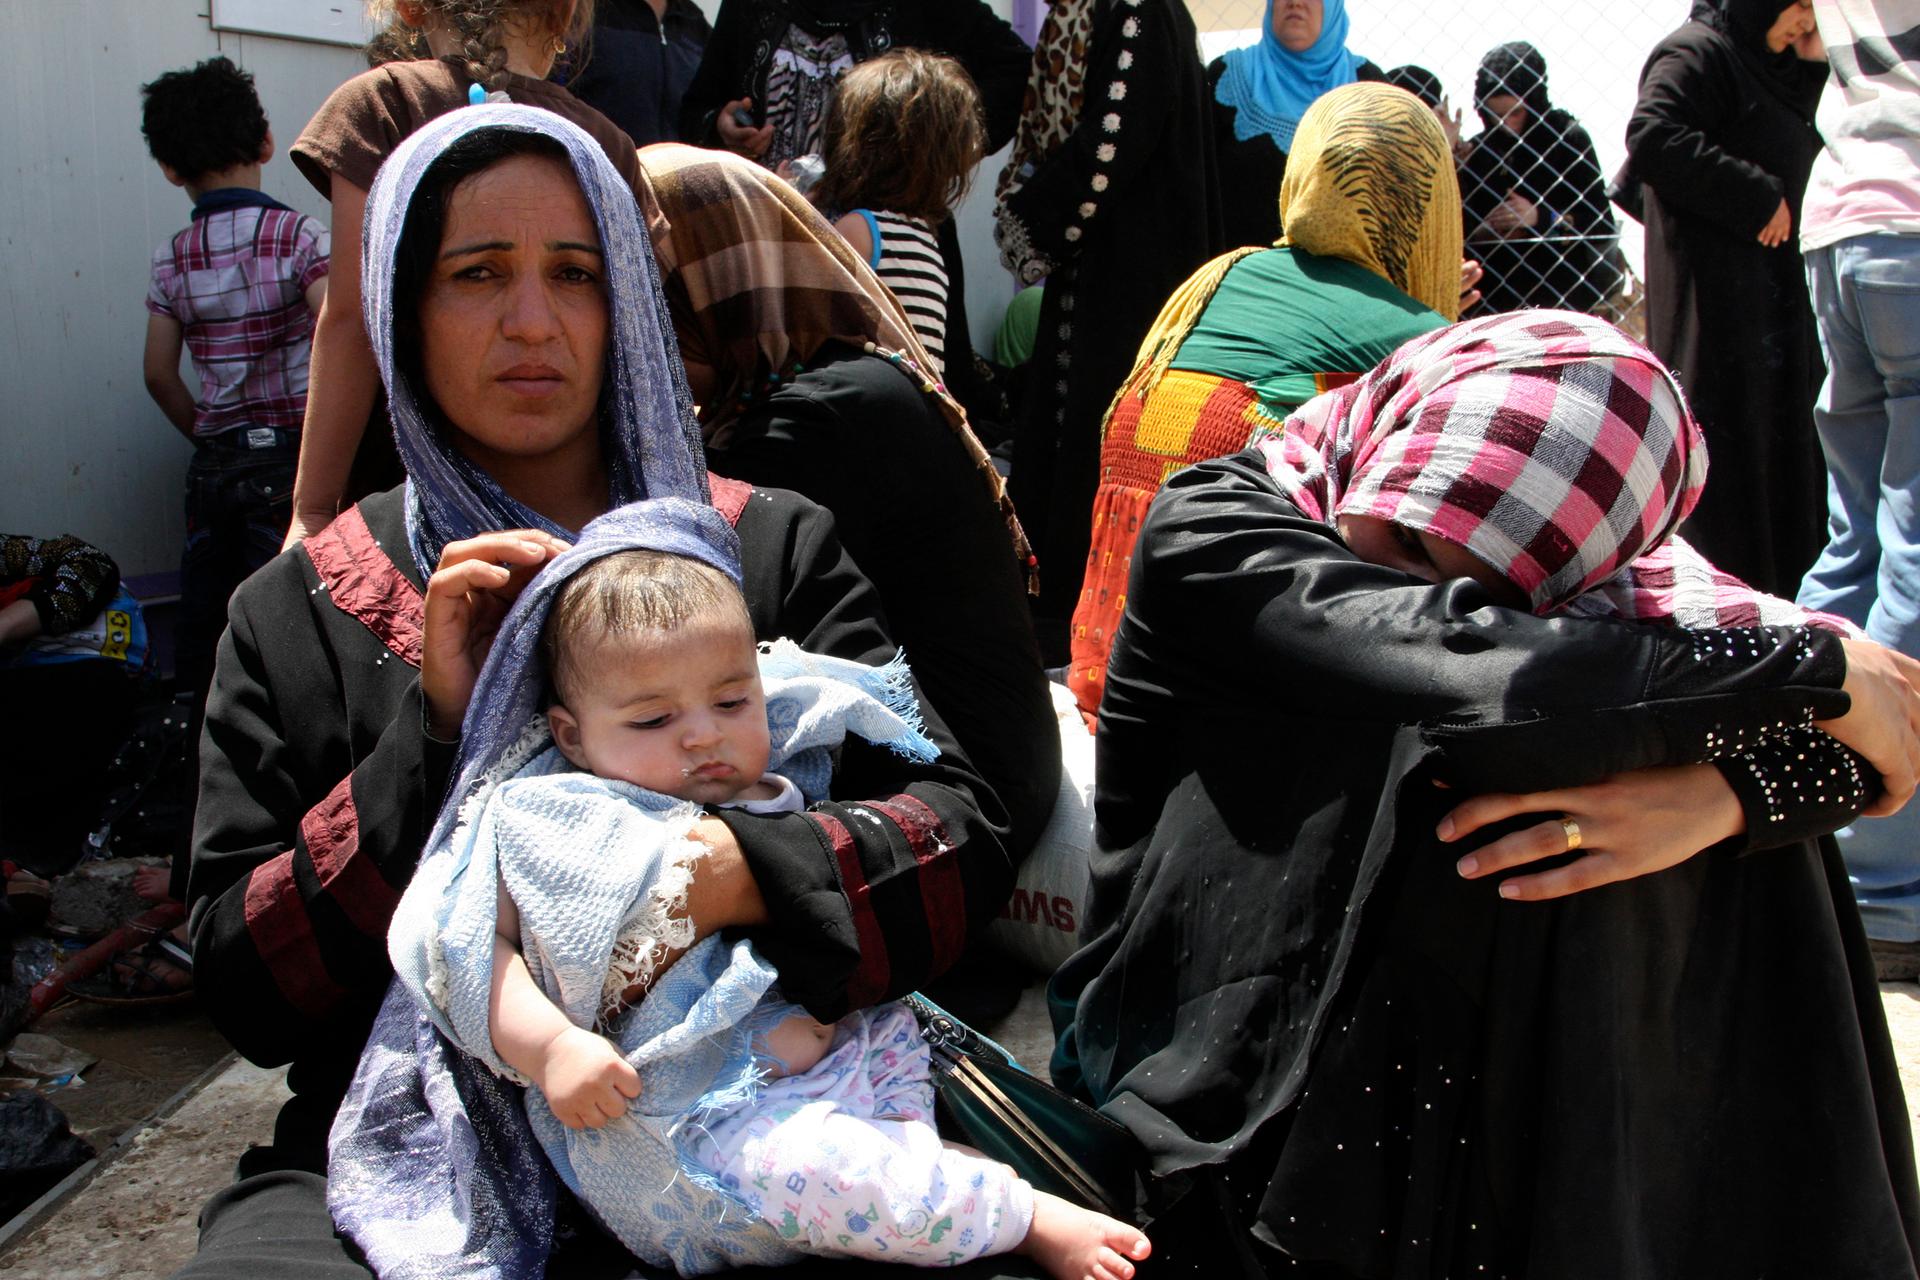 Families fleeing the violence in Mosul wait at a checkpoint on the outskirts of Arbil, in Iraq's Kurdistan region on June 10, 2014. Radical Sunni Muslim insurgents seized control of most of Iraq's second largest city of Mosul early on Tuesday, overrunning